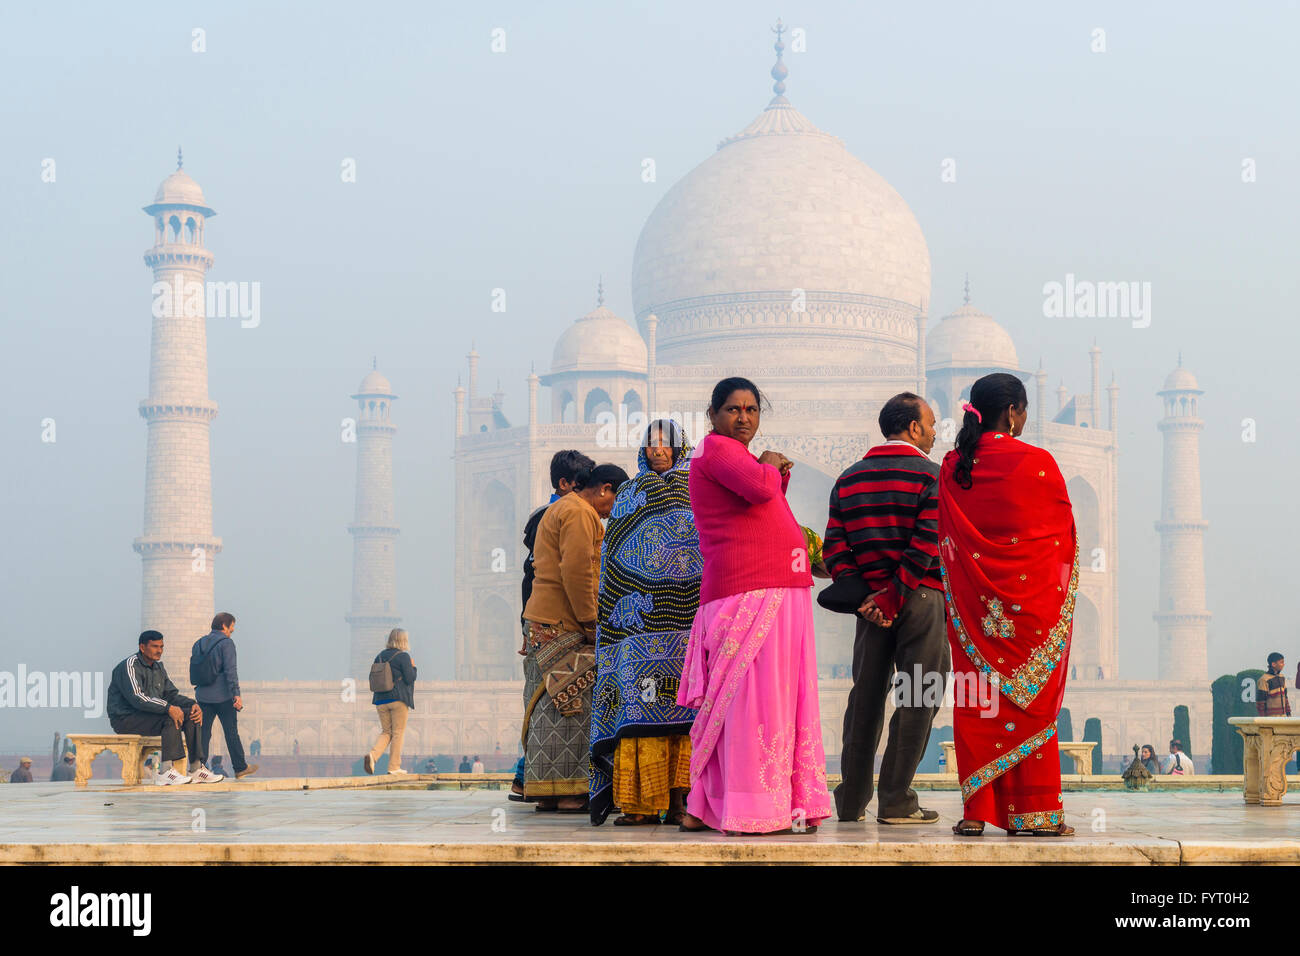 Group of indian tourists in colorful dress on a misty morning in front of Taj Mahal in Agra India Stock Photo